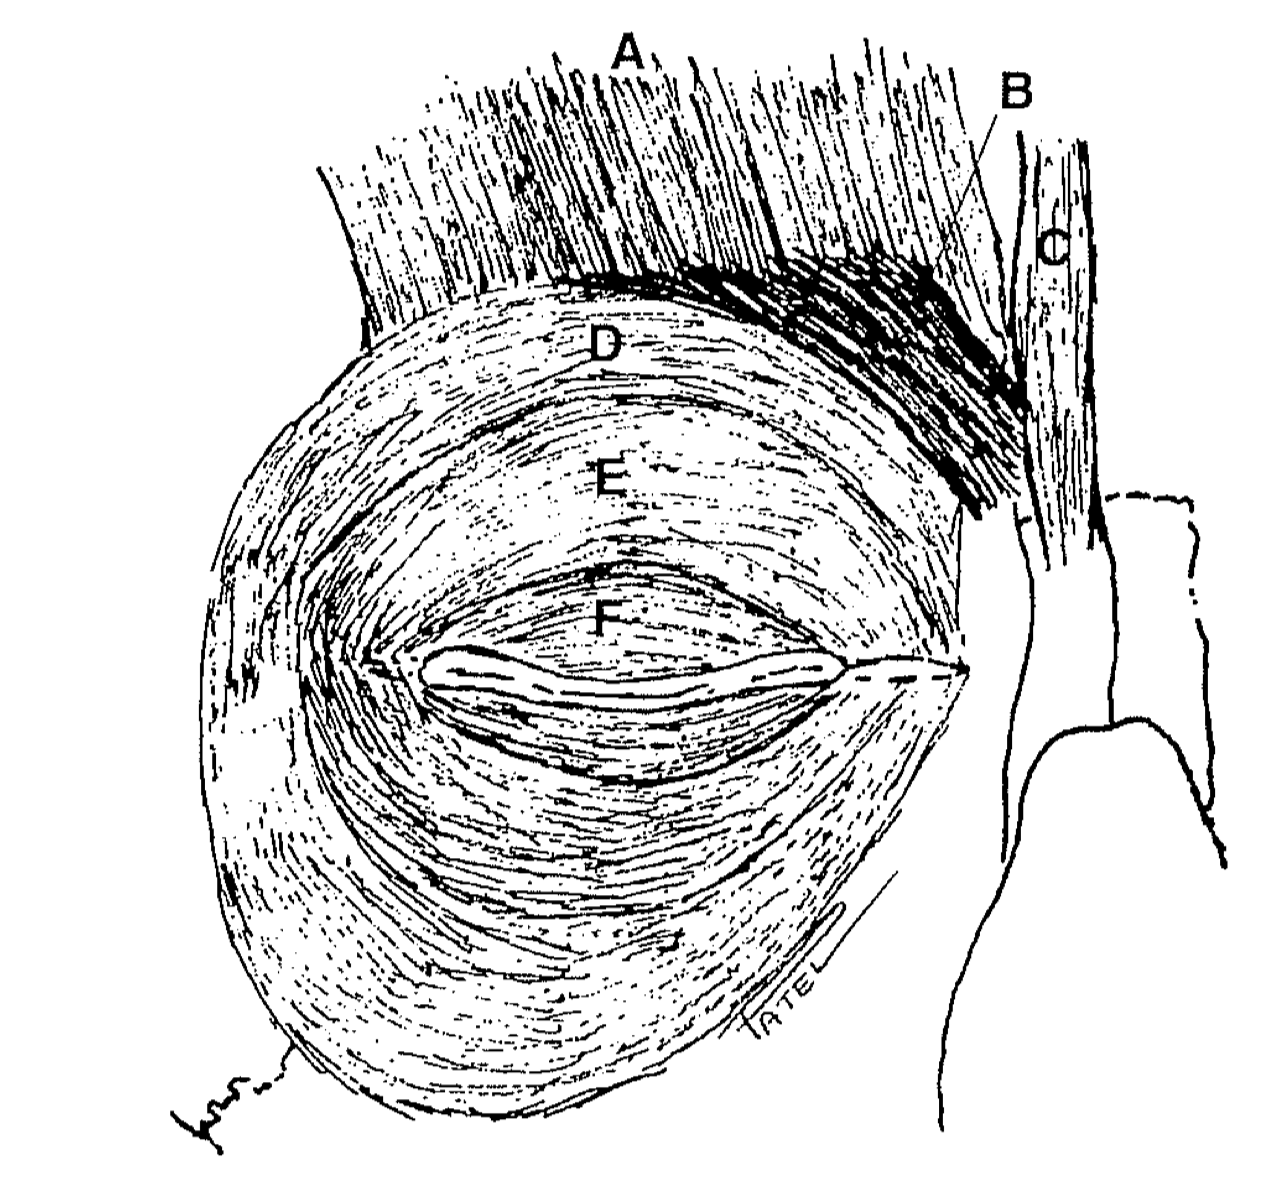 Orbicularis Oculi Muscle and its relations: 

A: Frontalis muscle
B: Corrugator superciliaris muscle
C: Procerus muscle
D: Orbital orbicularis muscle
E: Preseptal orbicularis muscle
F: Pretarsal orbicularis muscle